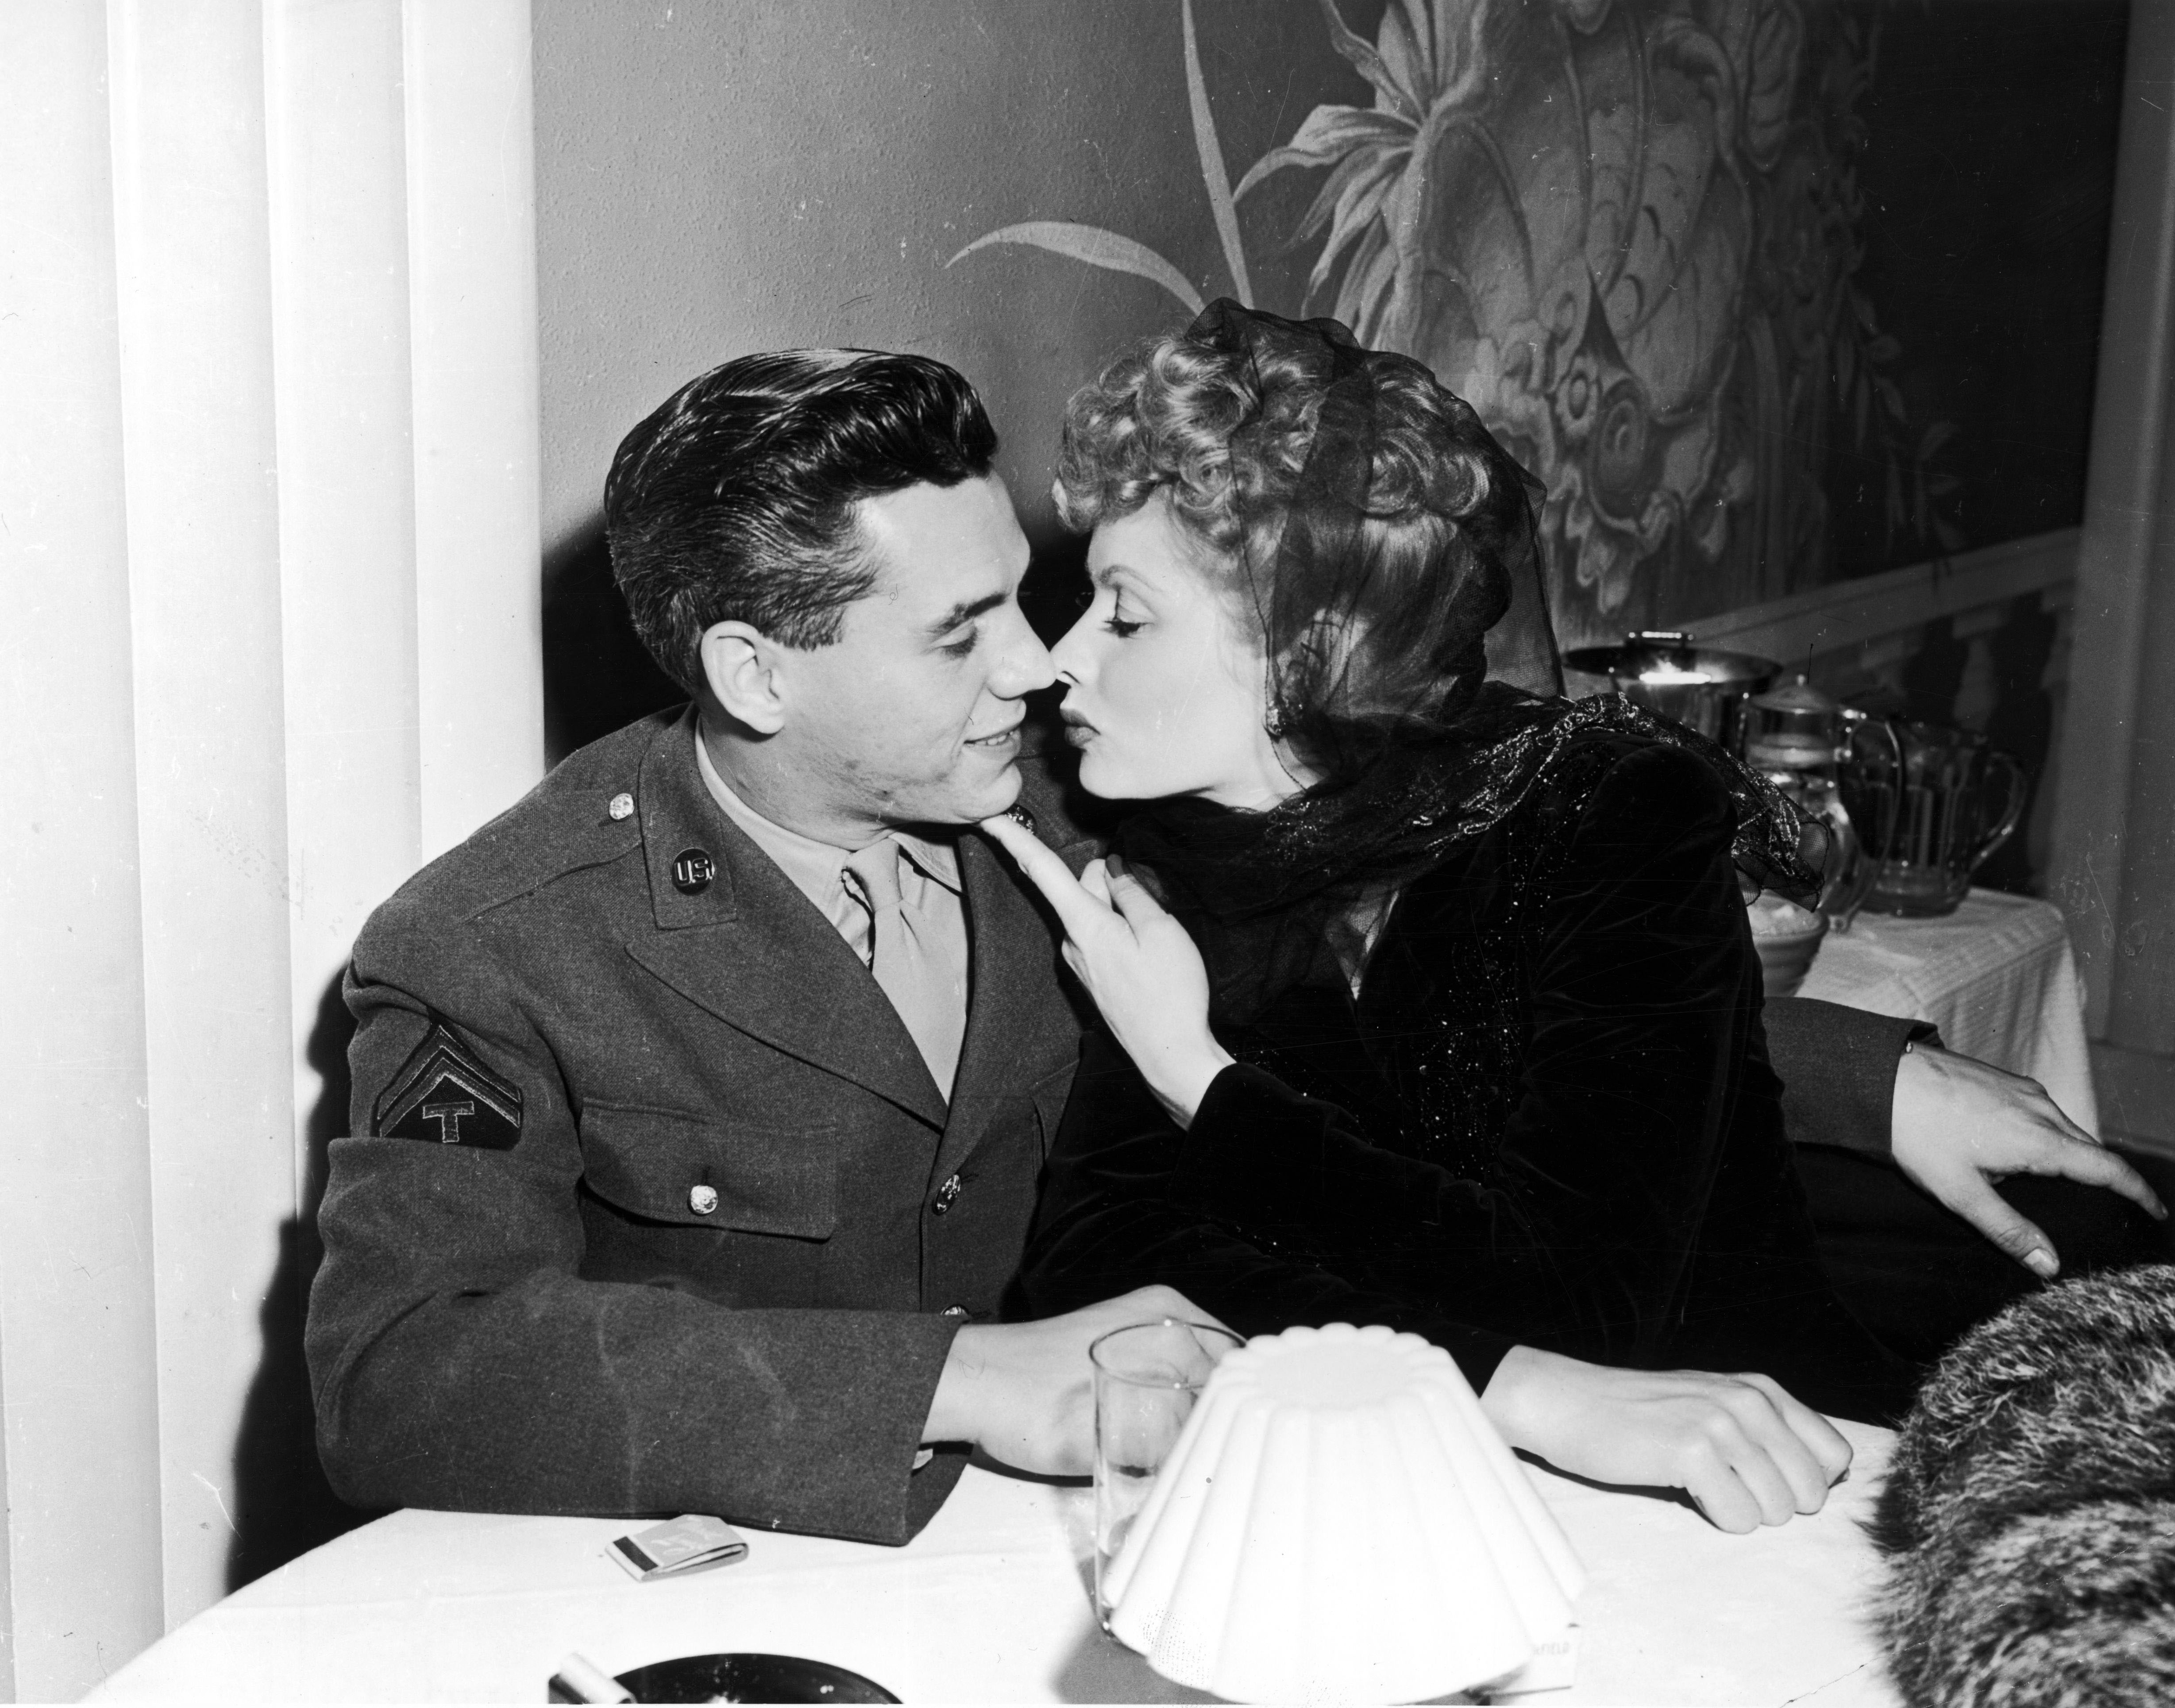 Desi Arnaz and Lucille Ball | William Grimes/Michael Ochs Archives/Getty Images